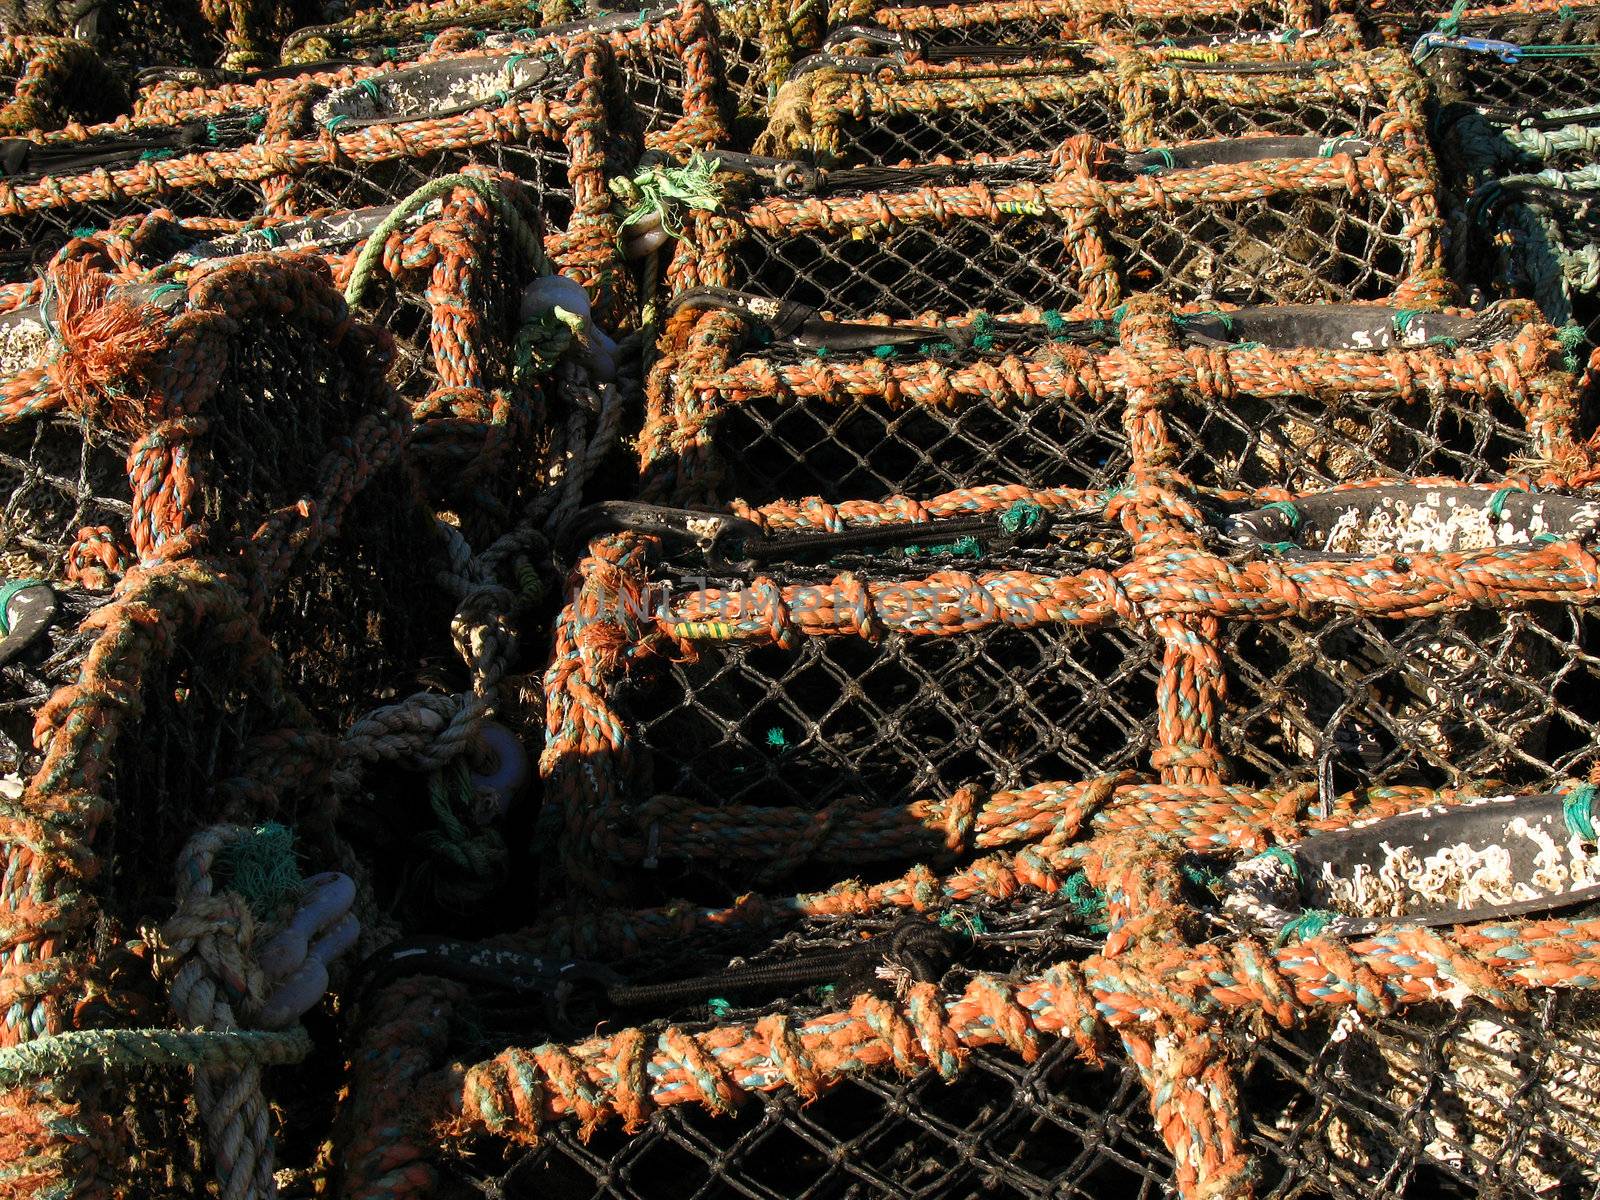 lobster pots and rope
